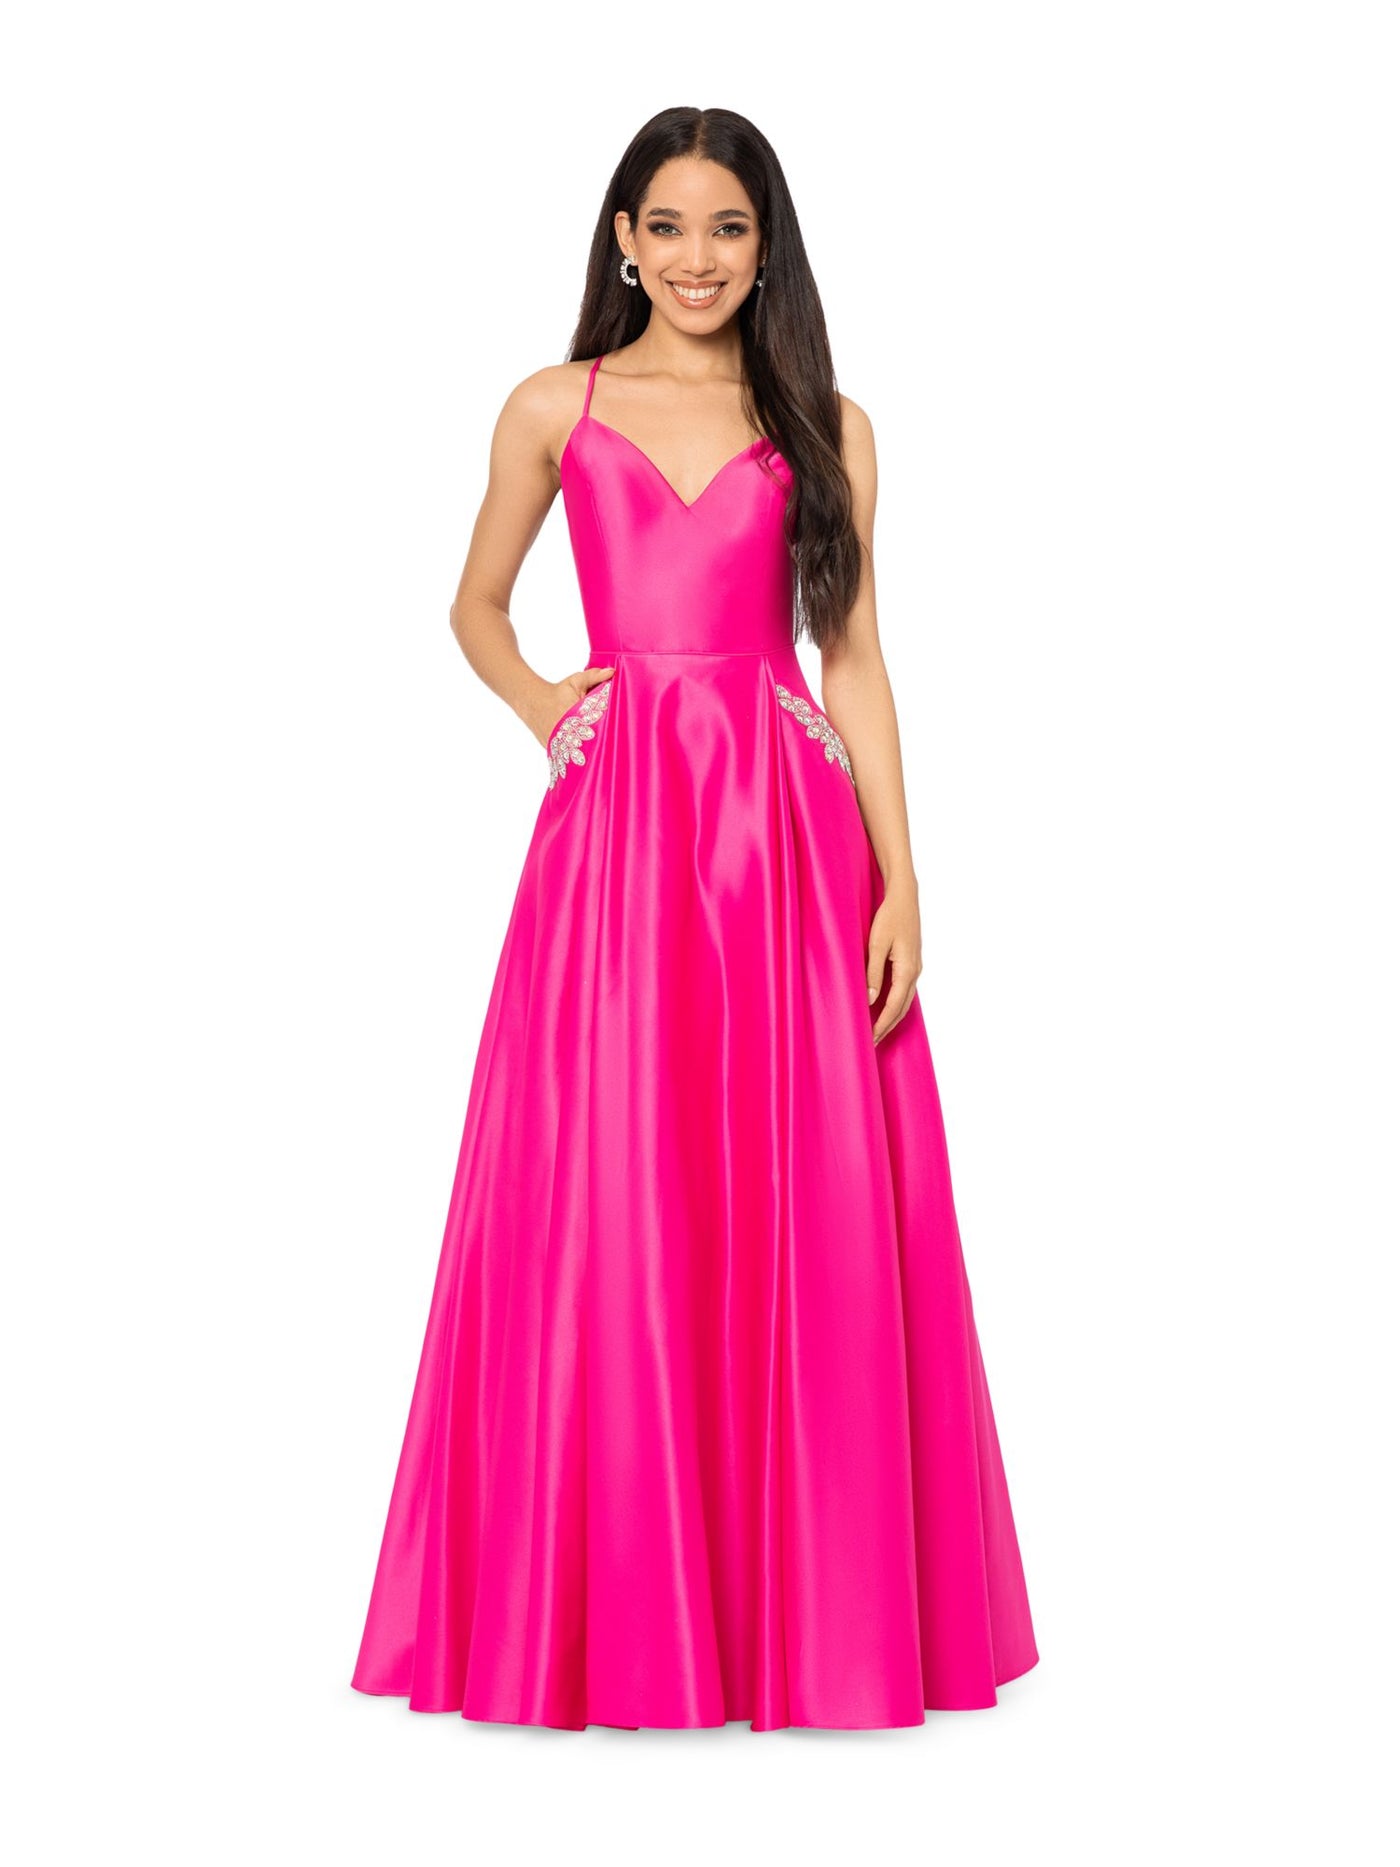 BLONDIE NITES Womens Pink Embellished Zippered Lace Up Back Pocketed Padded Spaghetti Strap Sweetheart Neckline Full-Length Formal Gown Dress Juniors 13